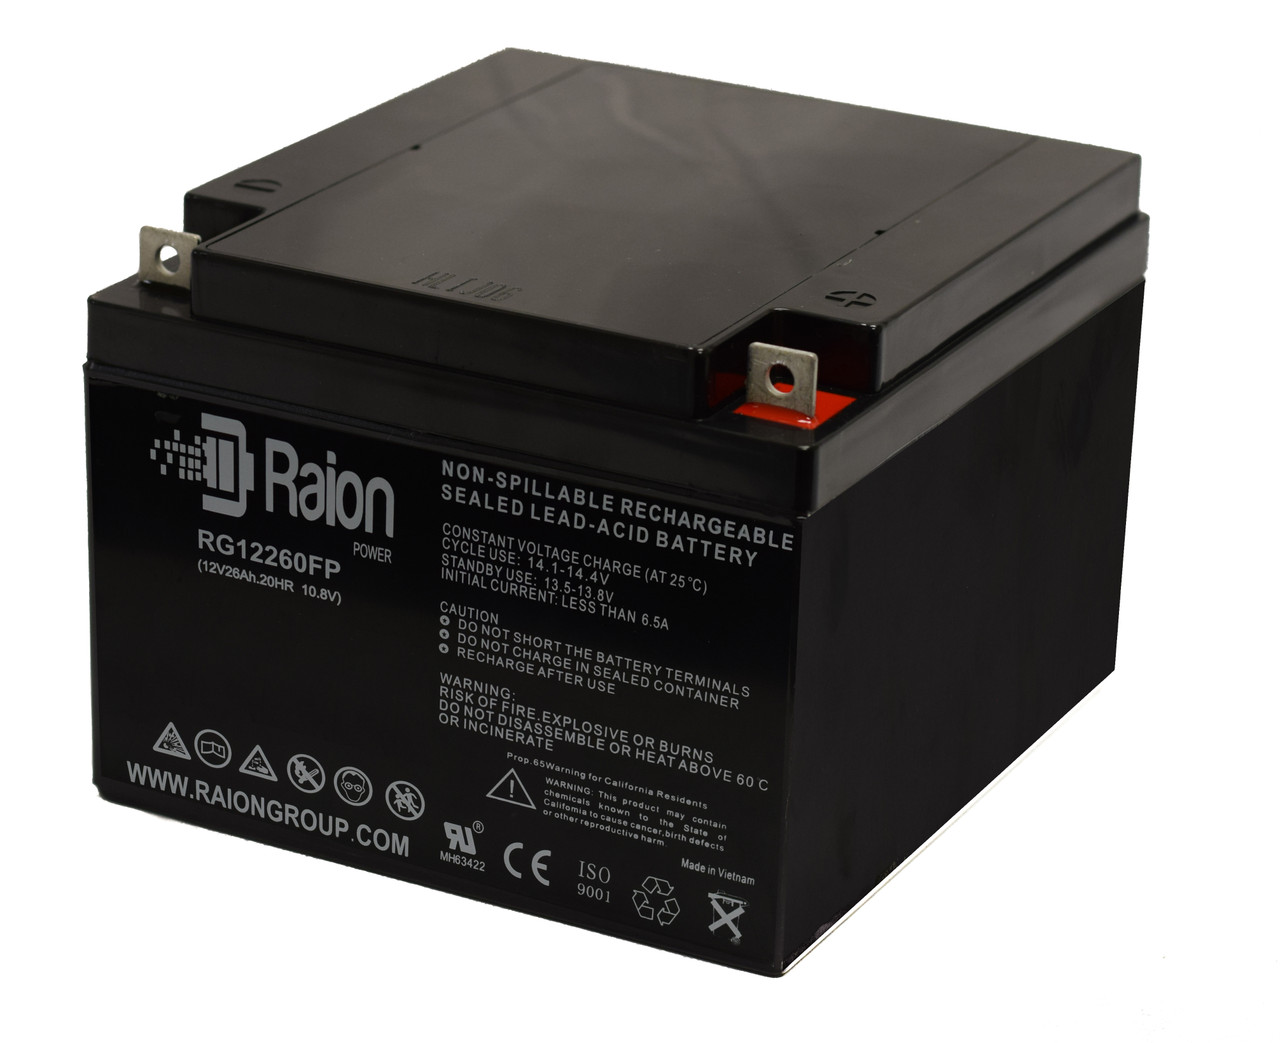 Raion Power 12V 26Ah Replacement UPS Battery Cartridge for Deltec PR1200